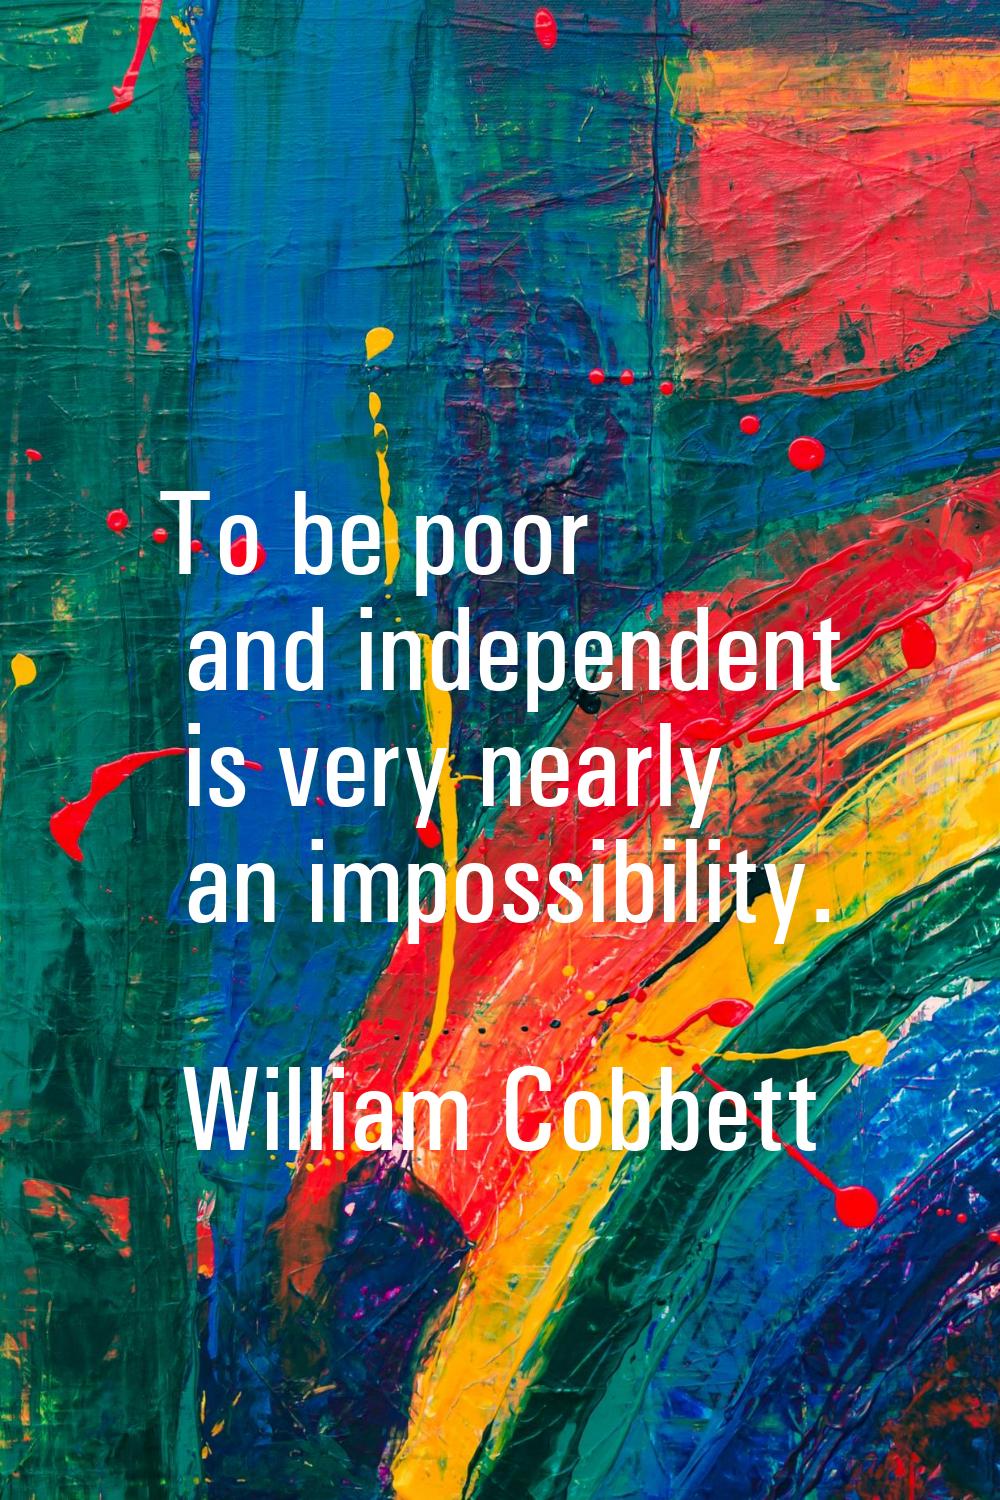 To be poor and independent is very nearly an impossibility.